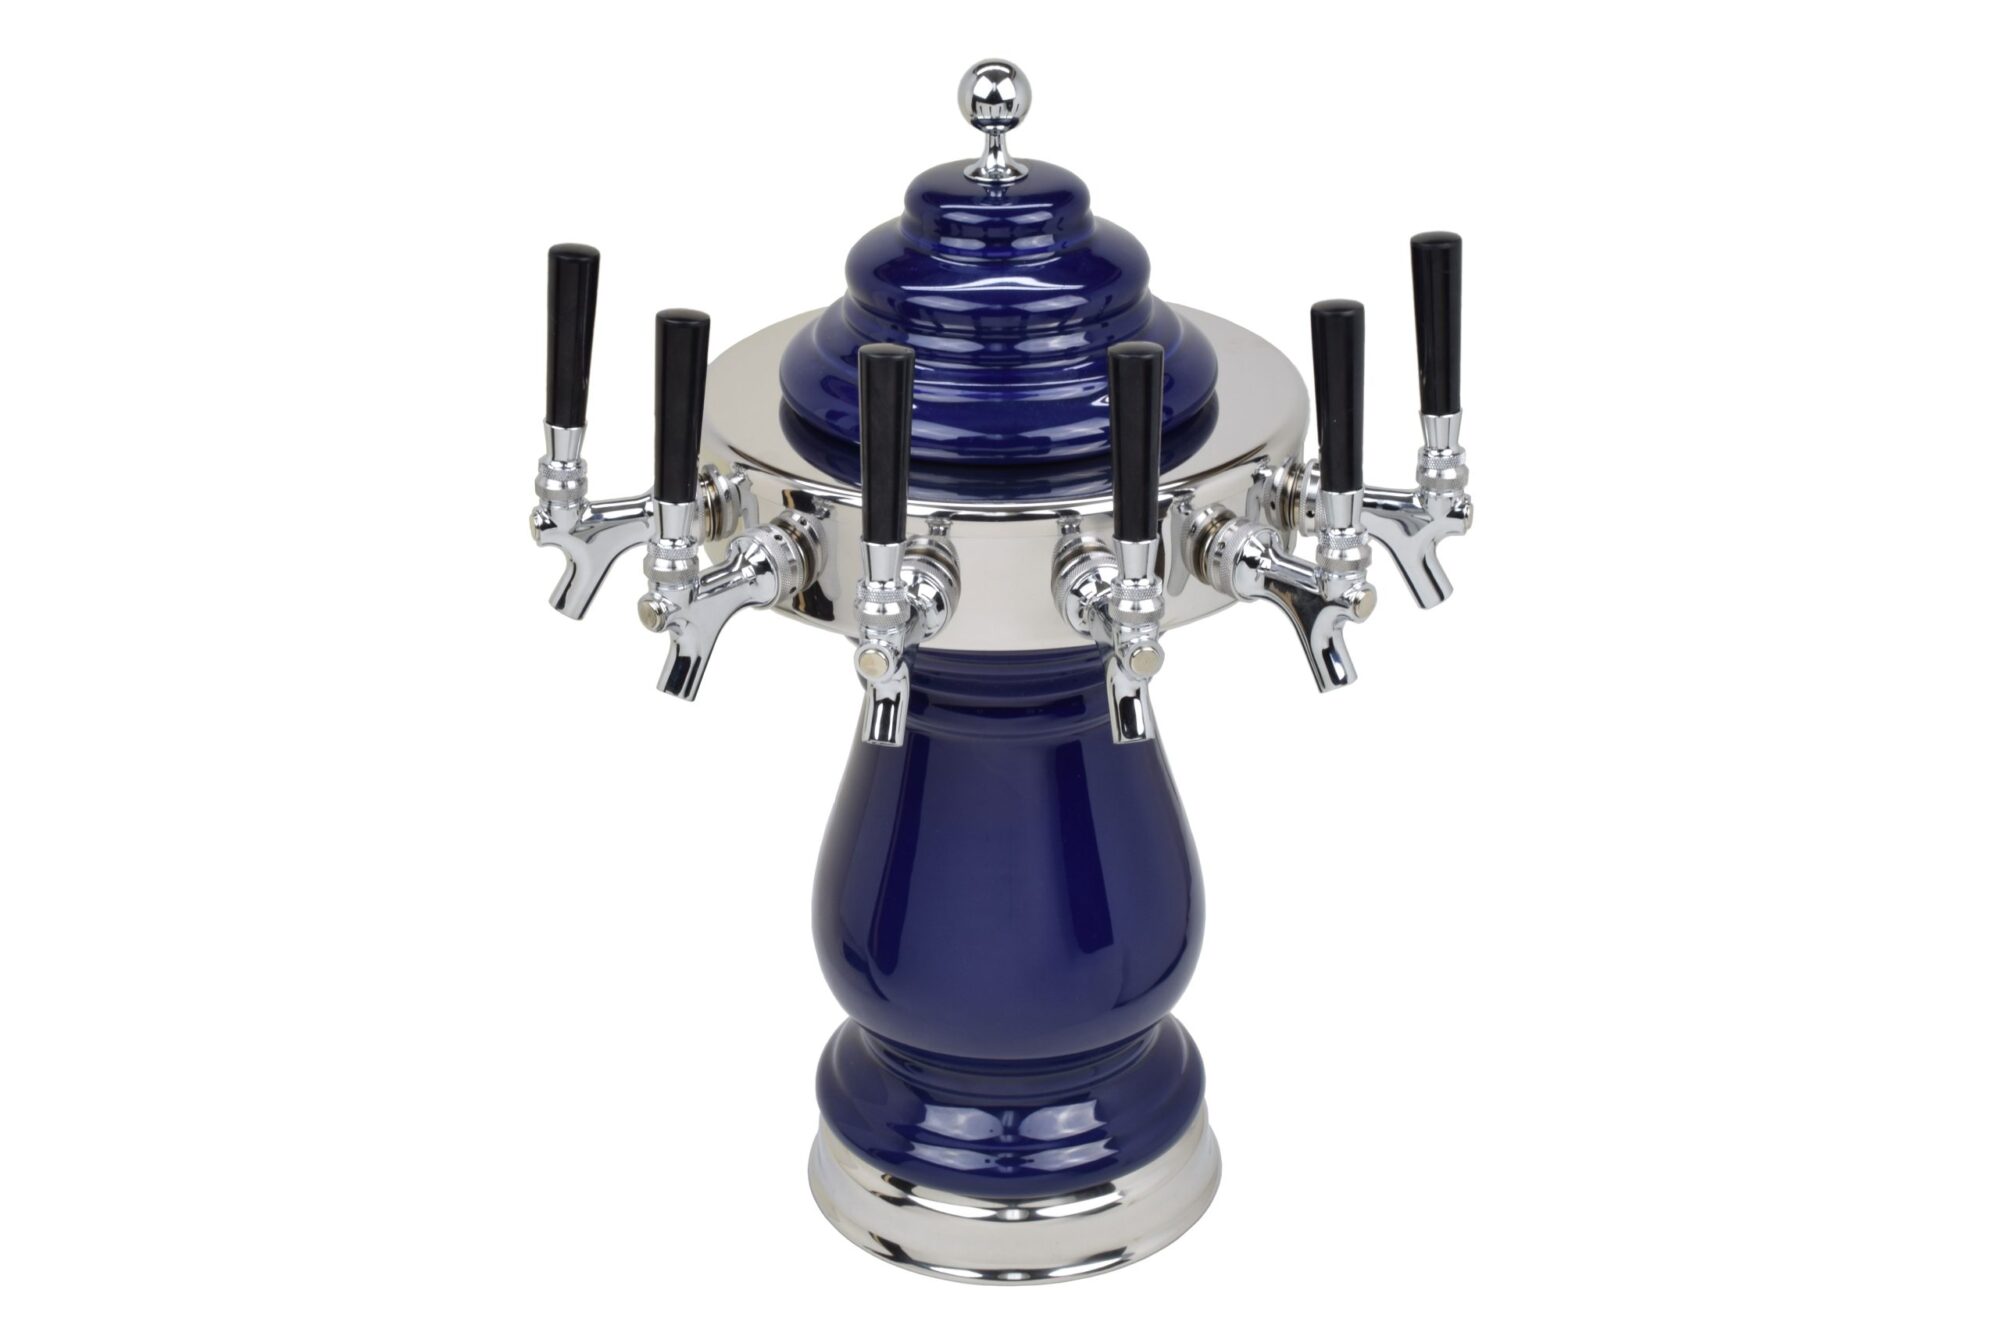 884C-6-BL Six Faucet Ceramic Tower with Chrome Hardware and Faucets - Shown in Cobalt Blue